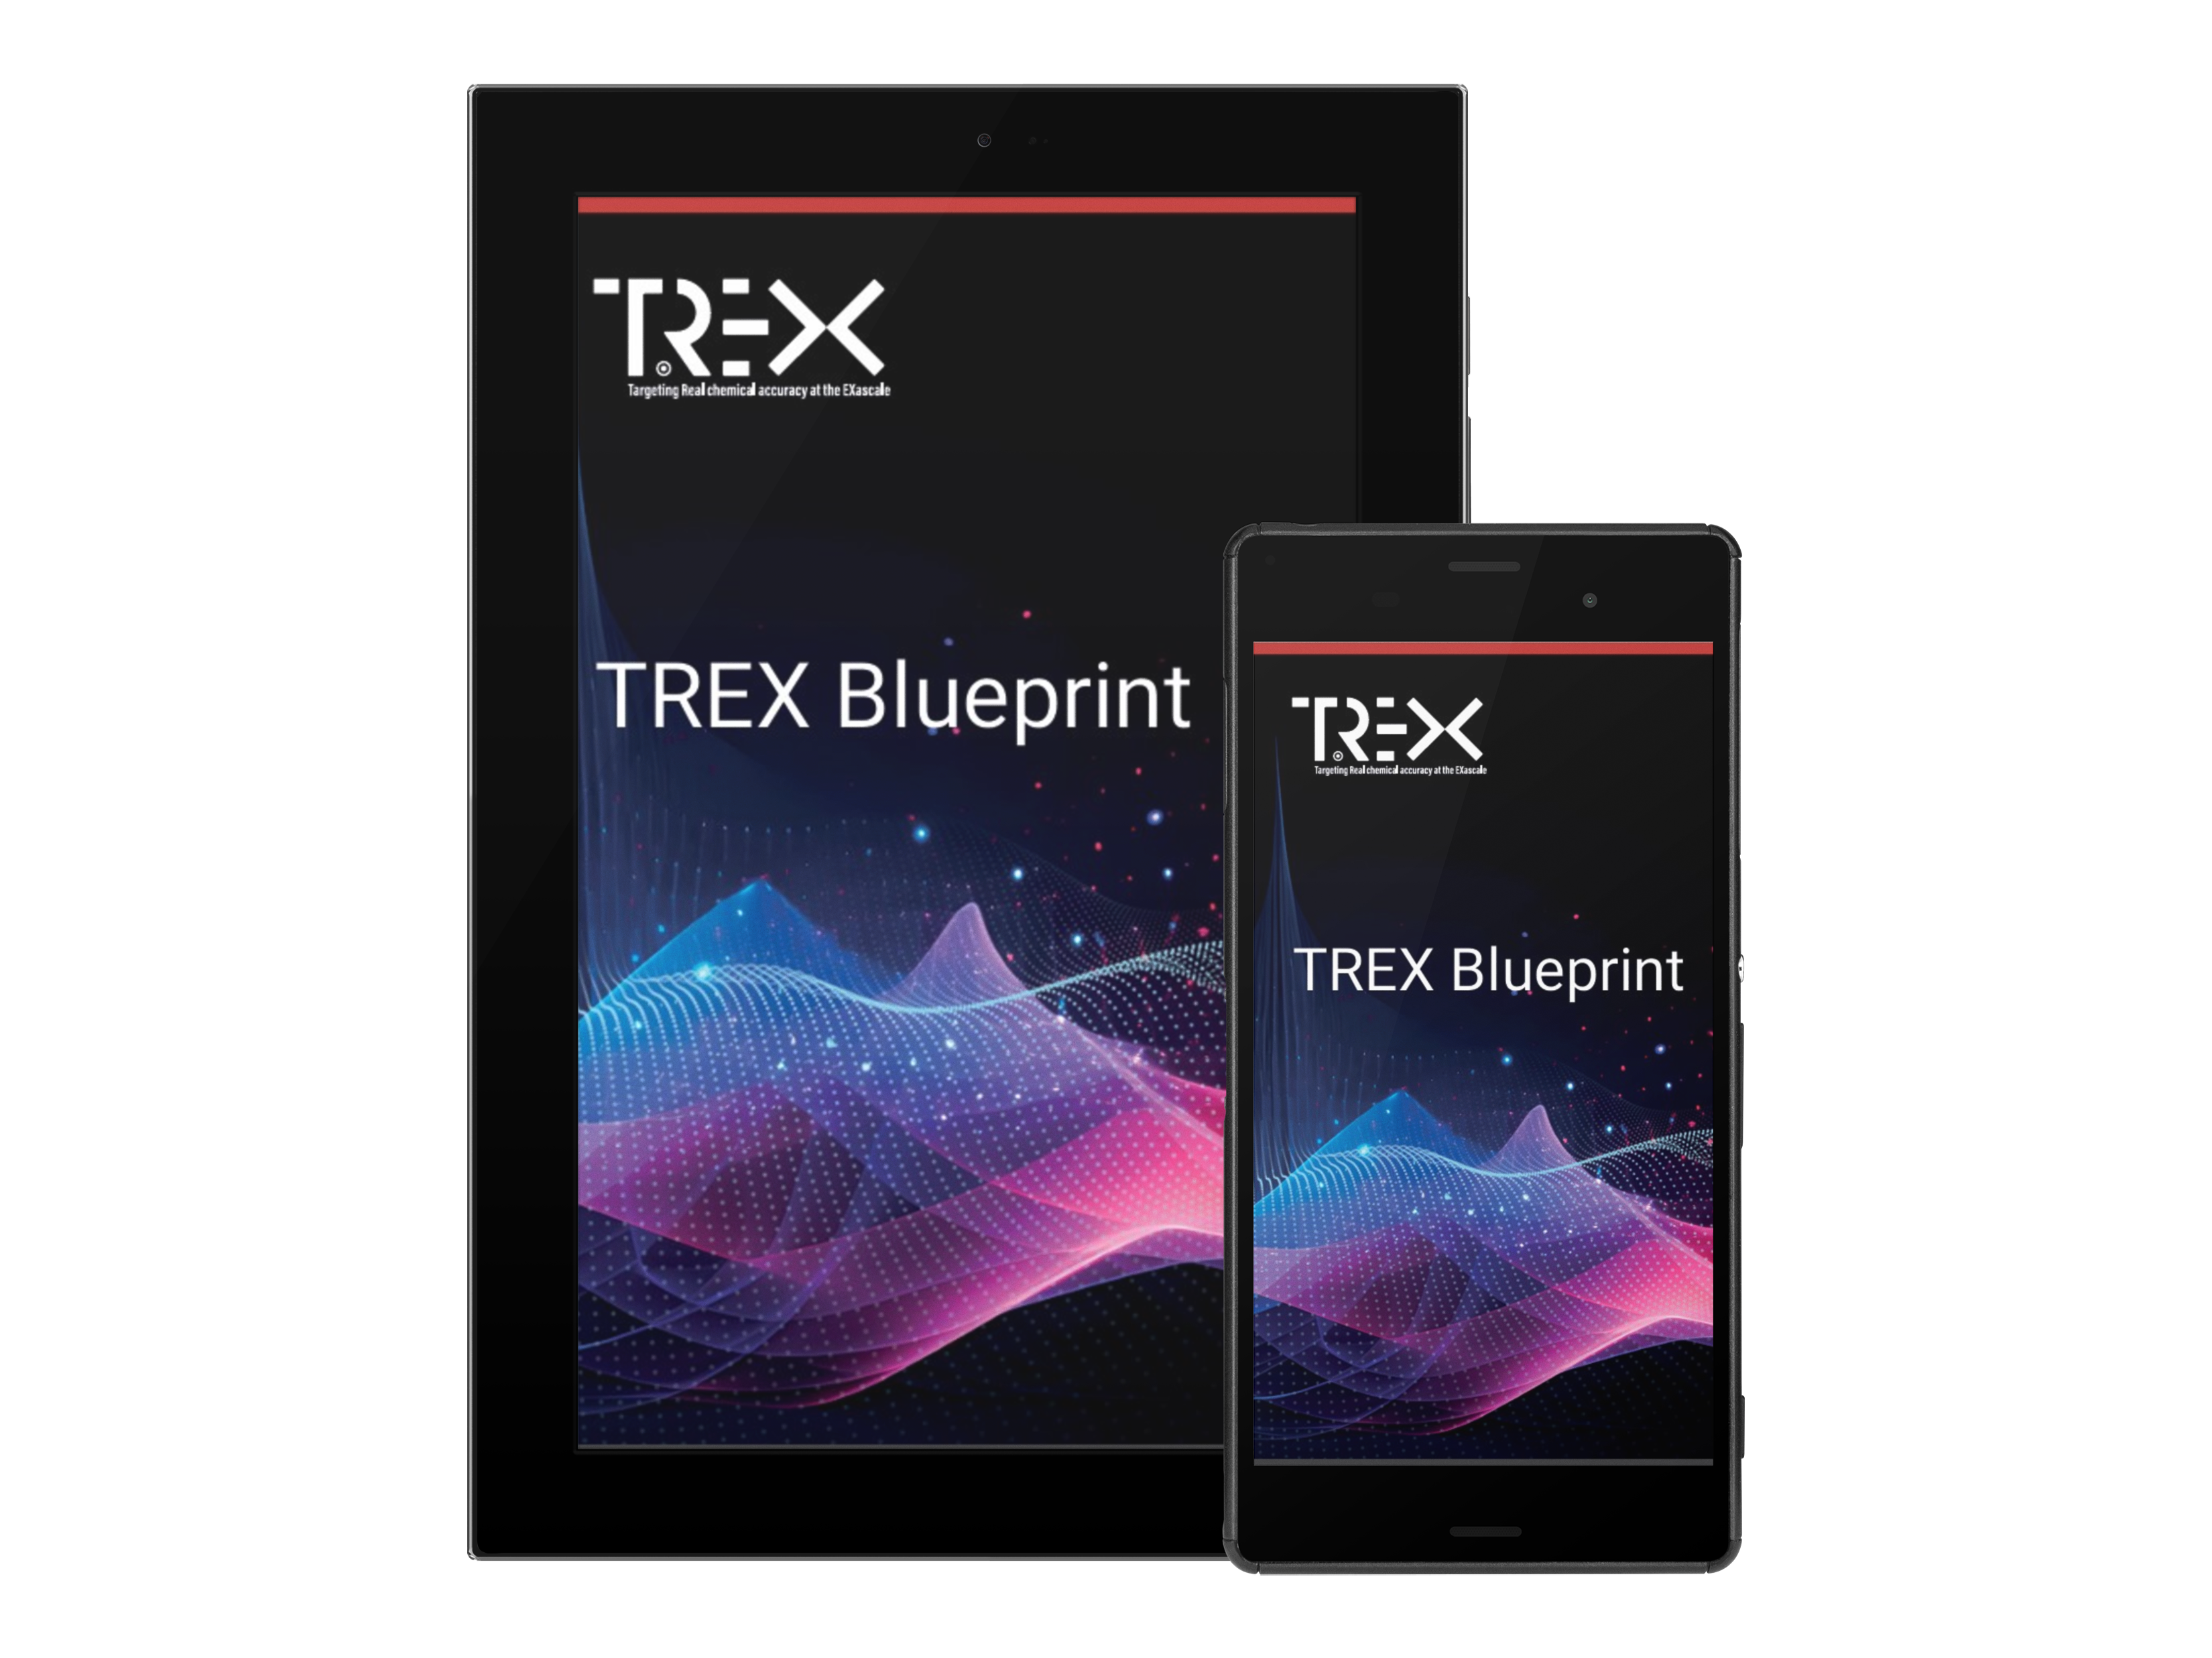 https://trex-coe.eu/sites/default/files/revslider/image/android-galaxy-tablet-with-android-phone-responsive-mockup-over-a-png-background-a11881.png